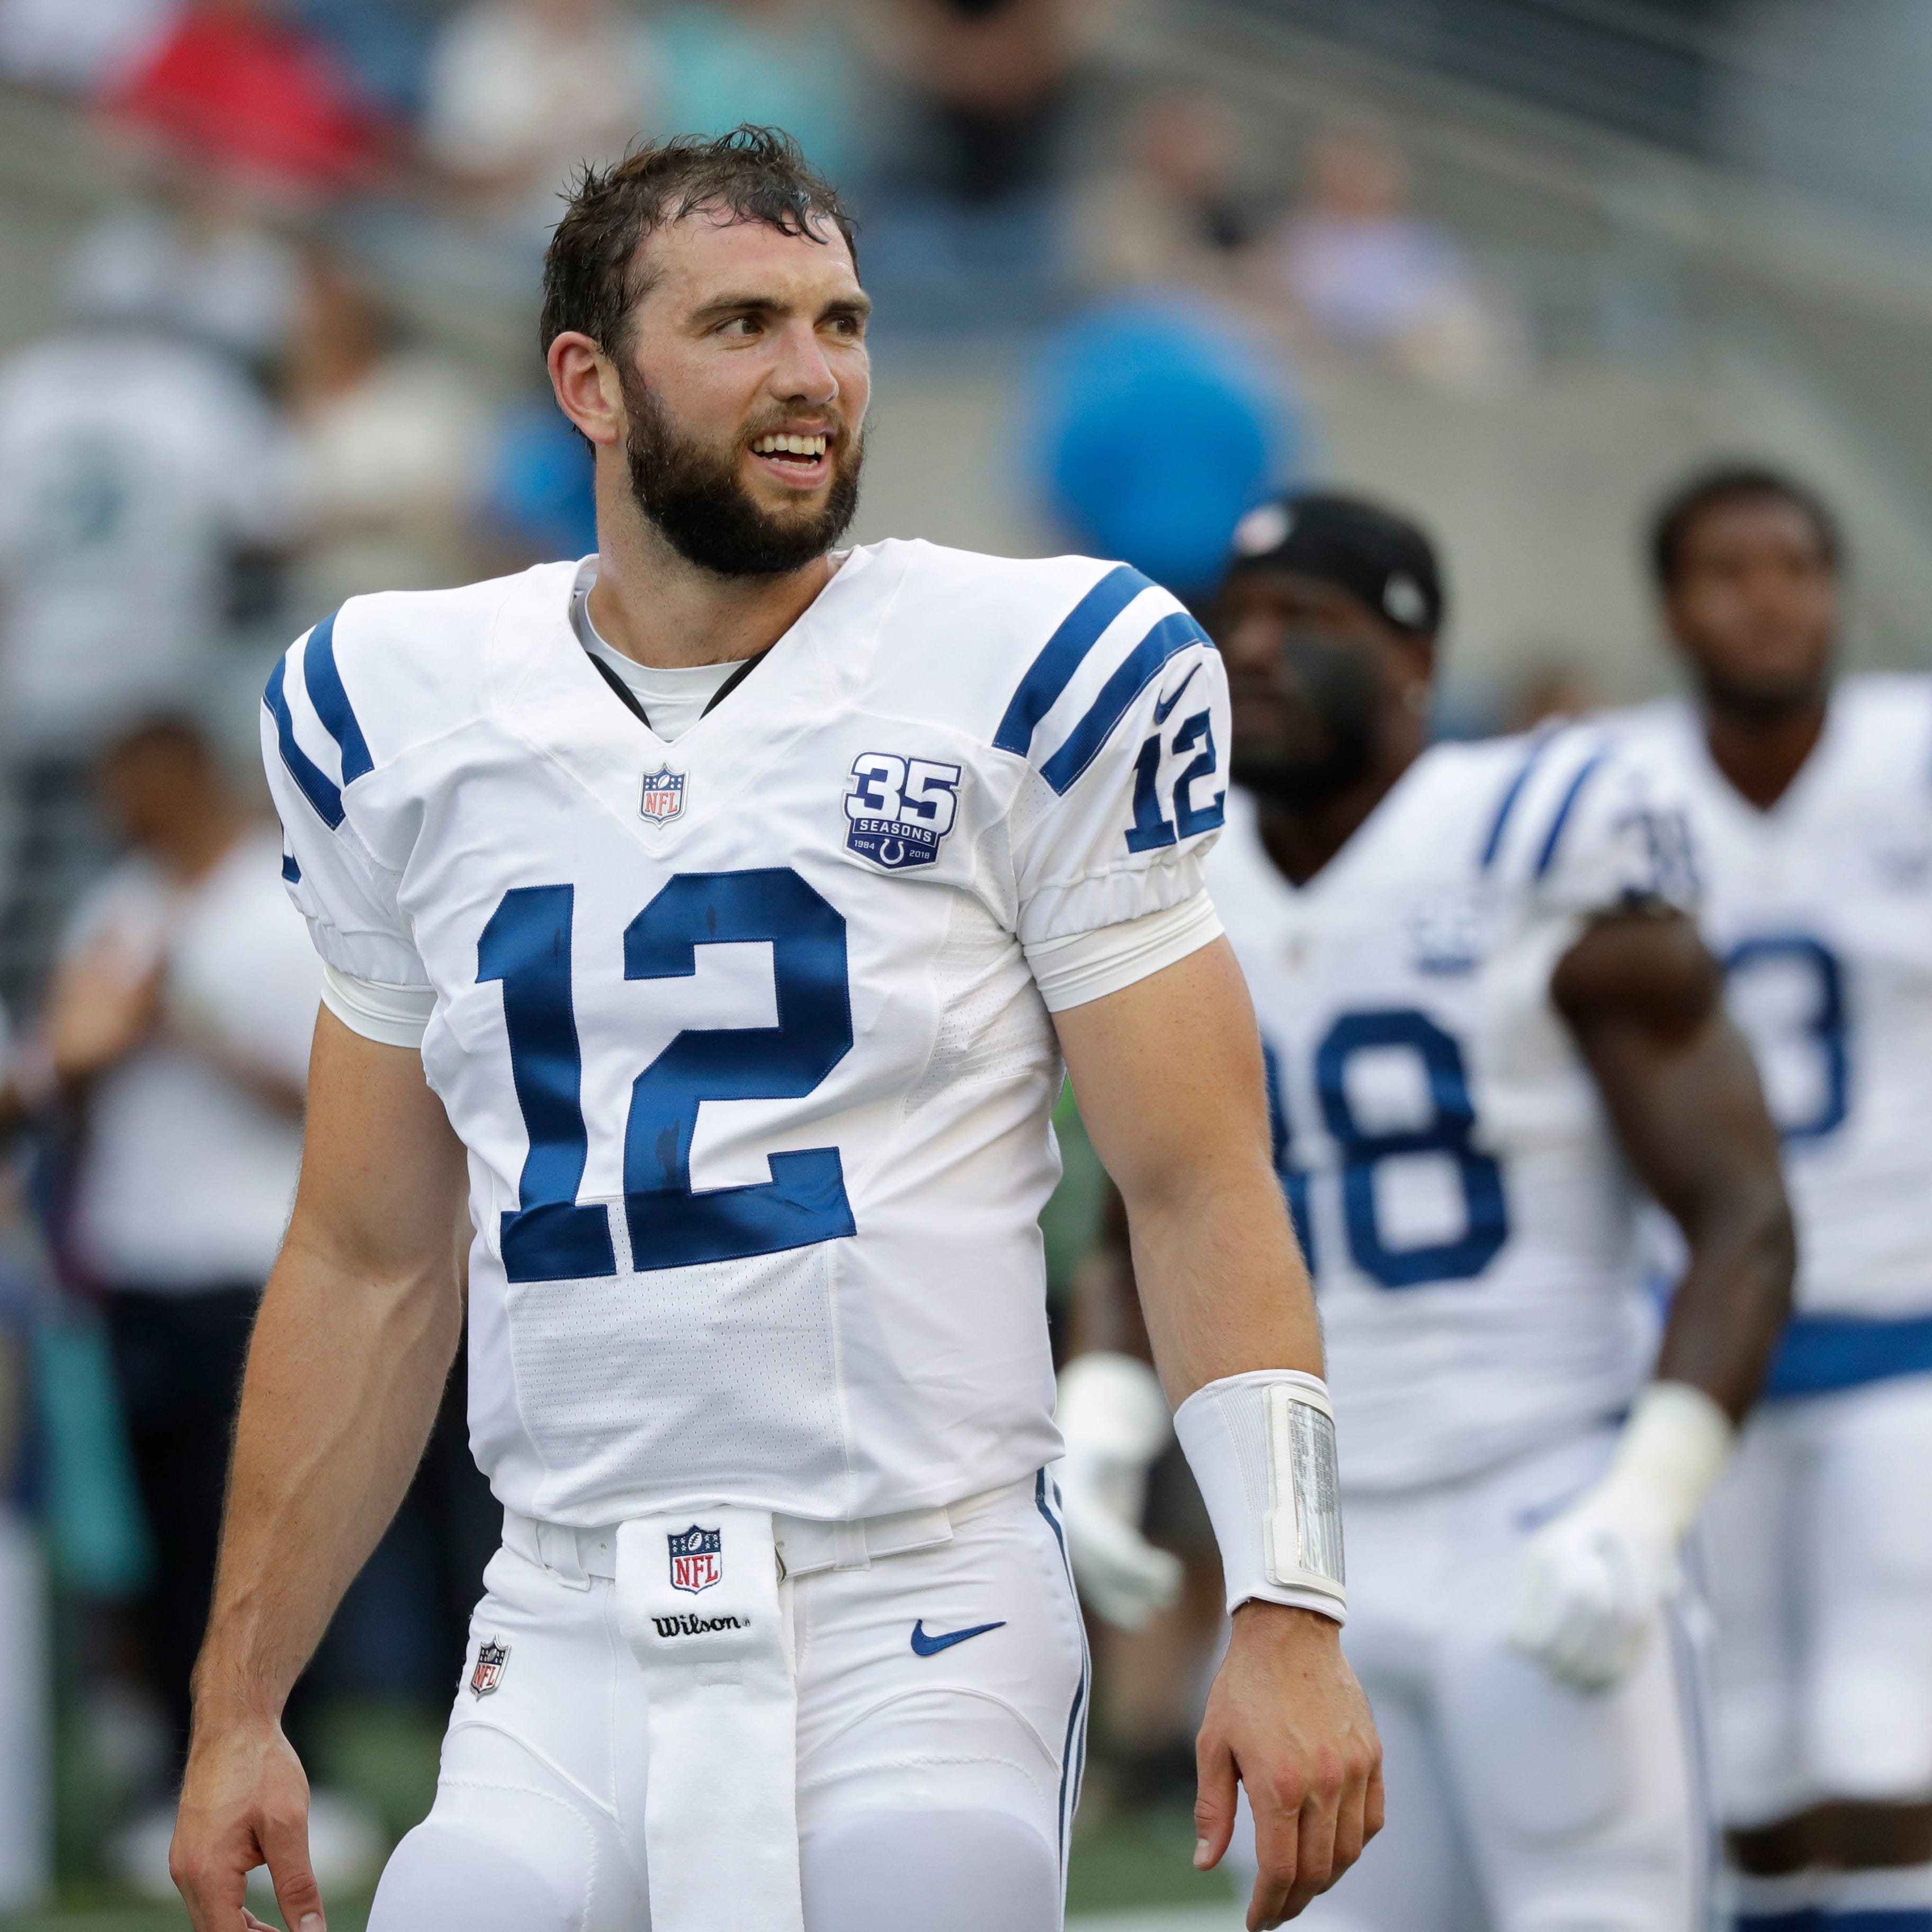 Indianapolis Colts quarterback Andrew Luck stands on the field before an NFL football preseason game against the Seattle Seahawks, Thursday, Aug. 9, 2018, in Seattle. (AP Photo/Elaine Thompson)